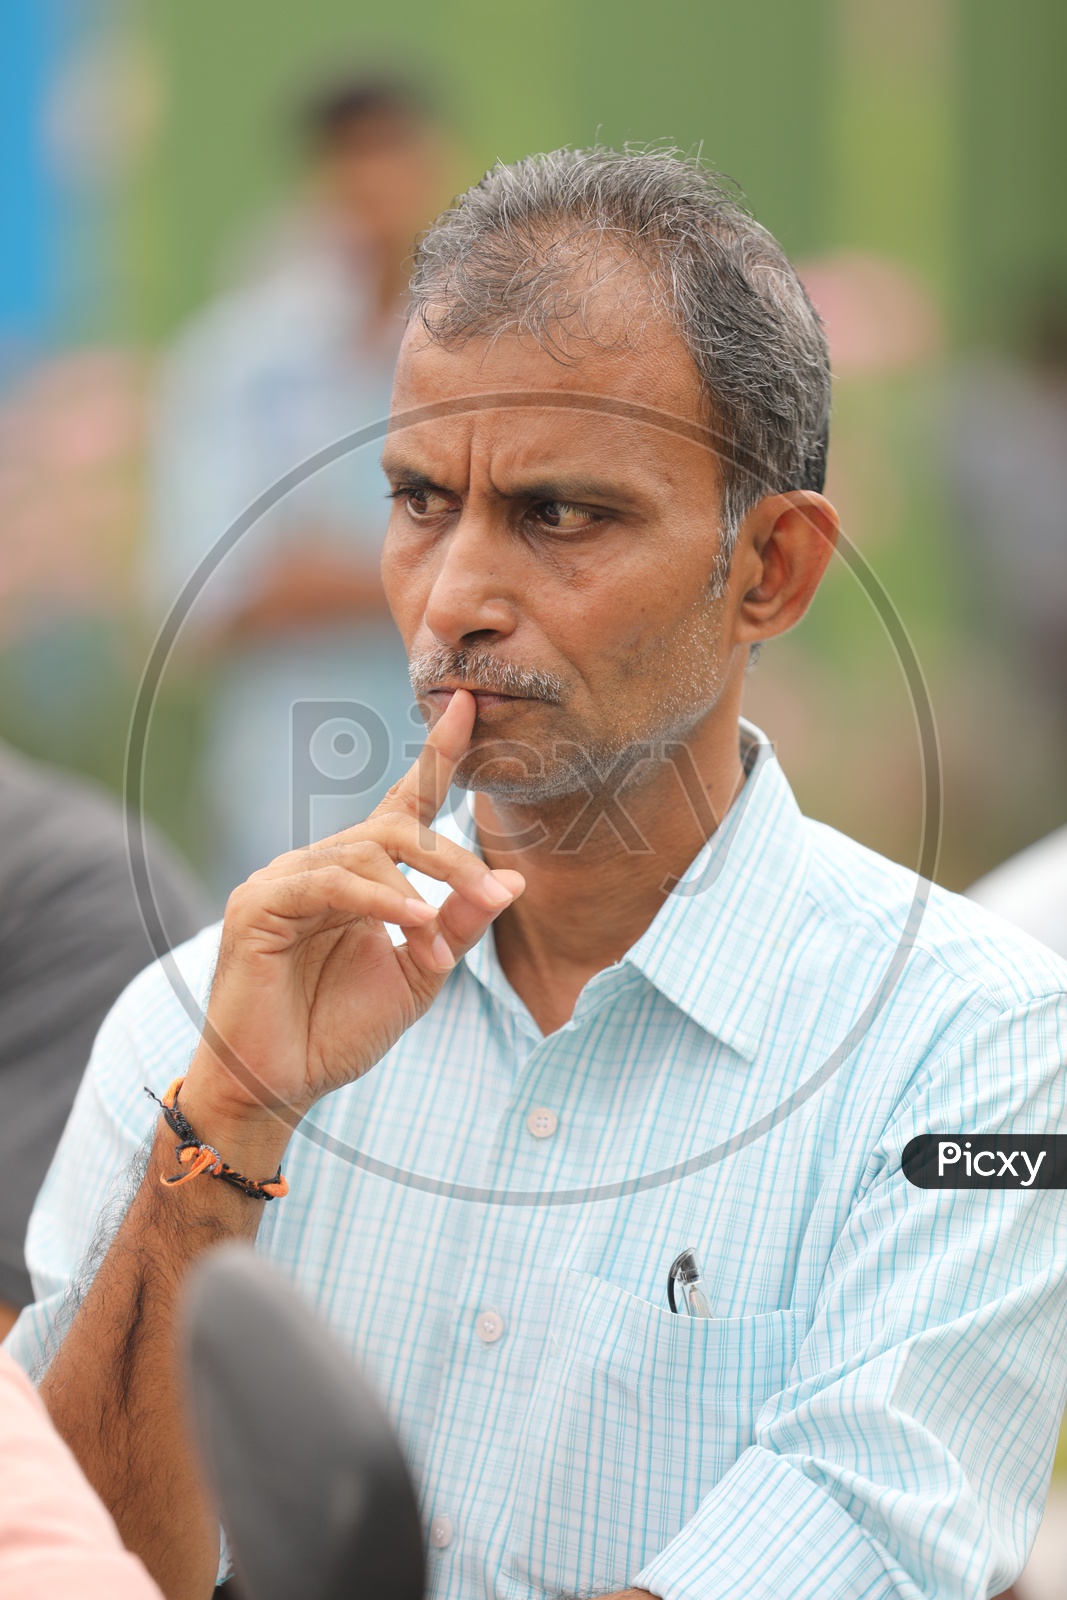 Indian Man With an Expression  Thinking